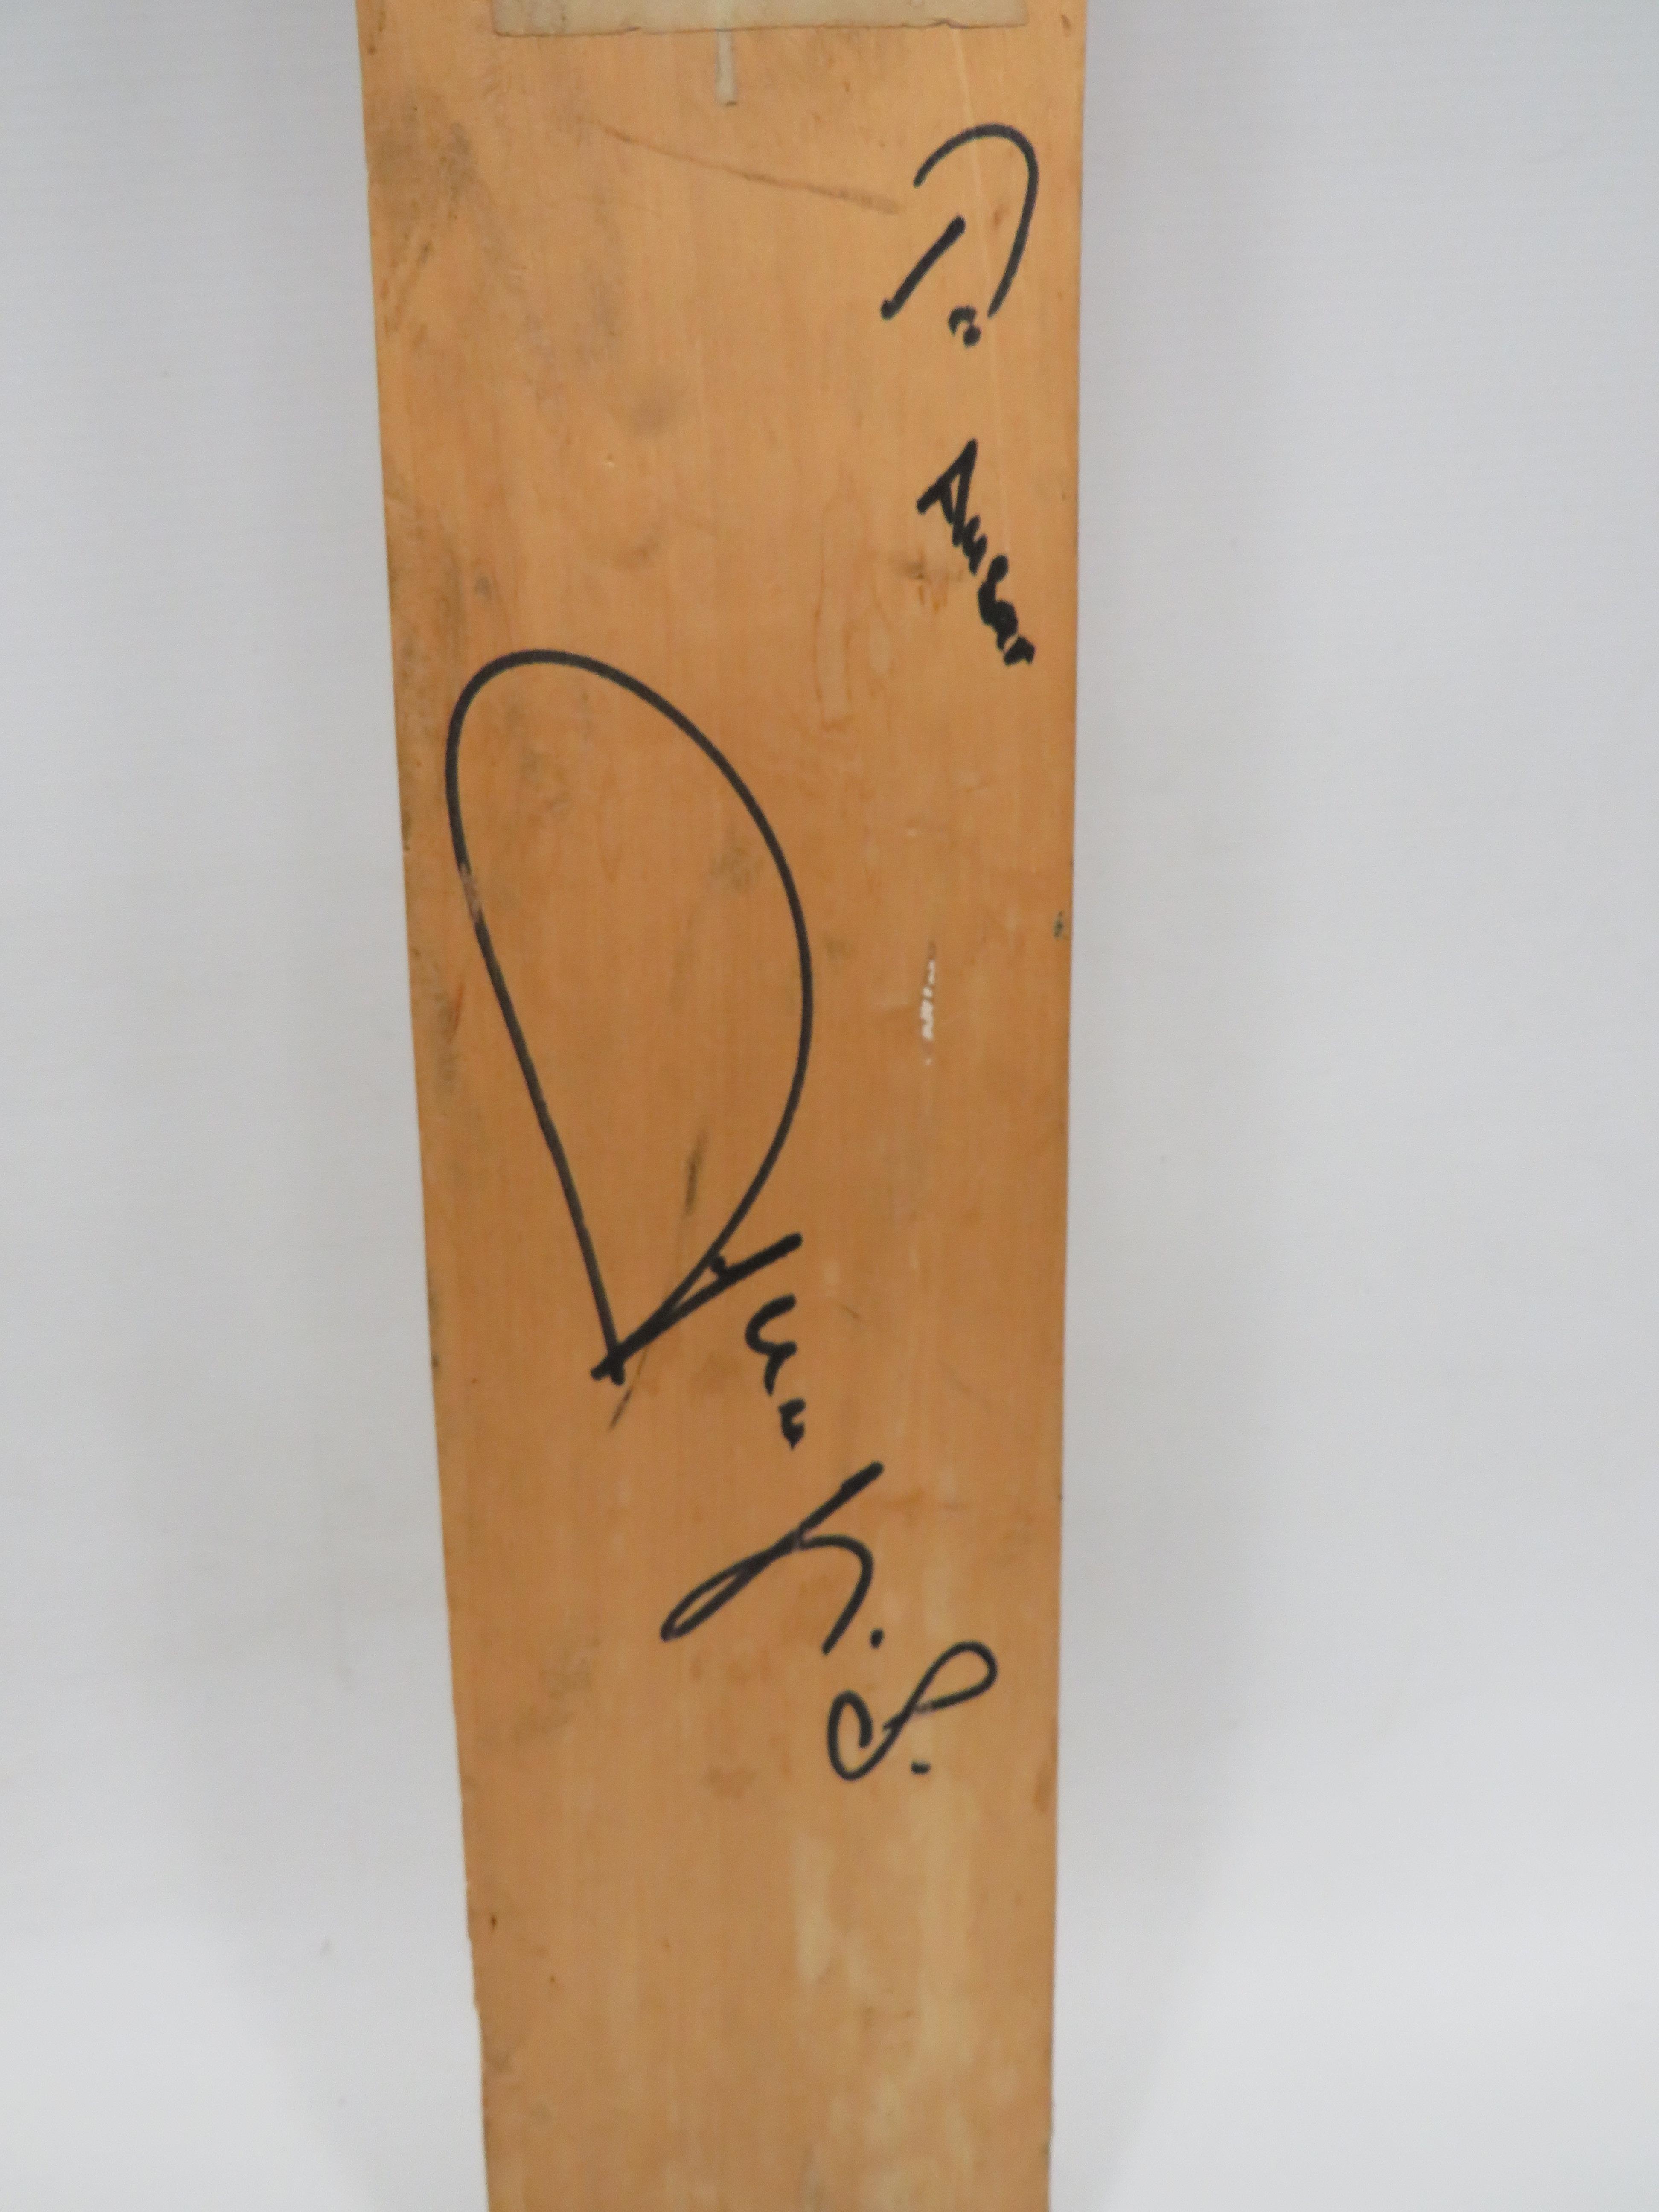 Childs Size Cricket bat by 'Major', 32 inches long. Indistinct signature to face. See photos - Image 2 of 4